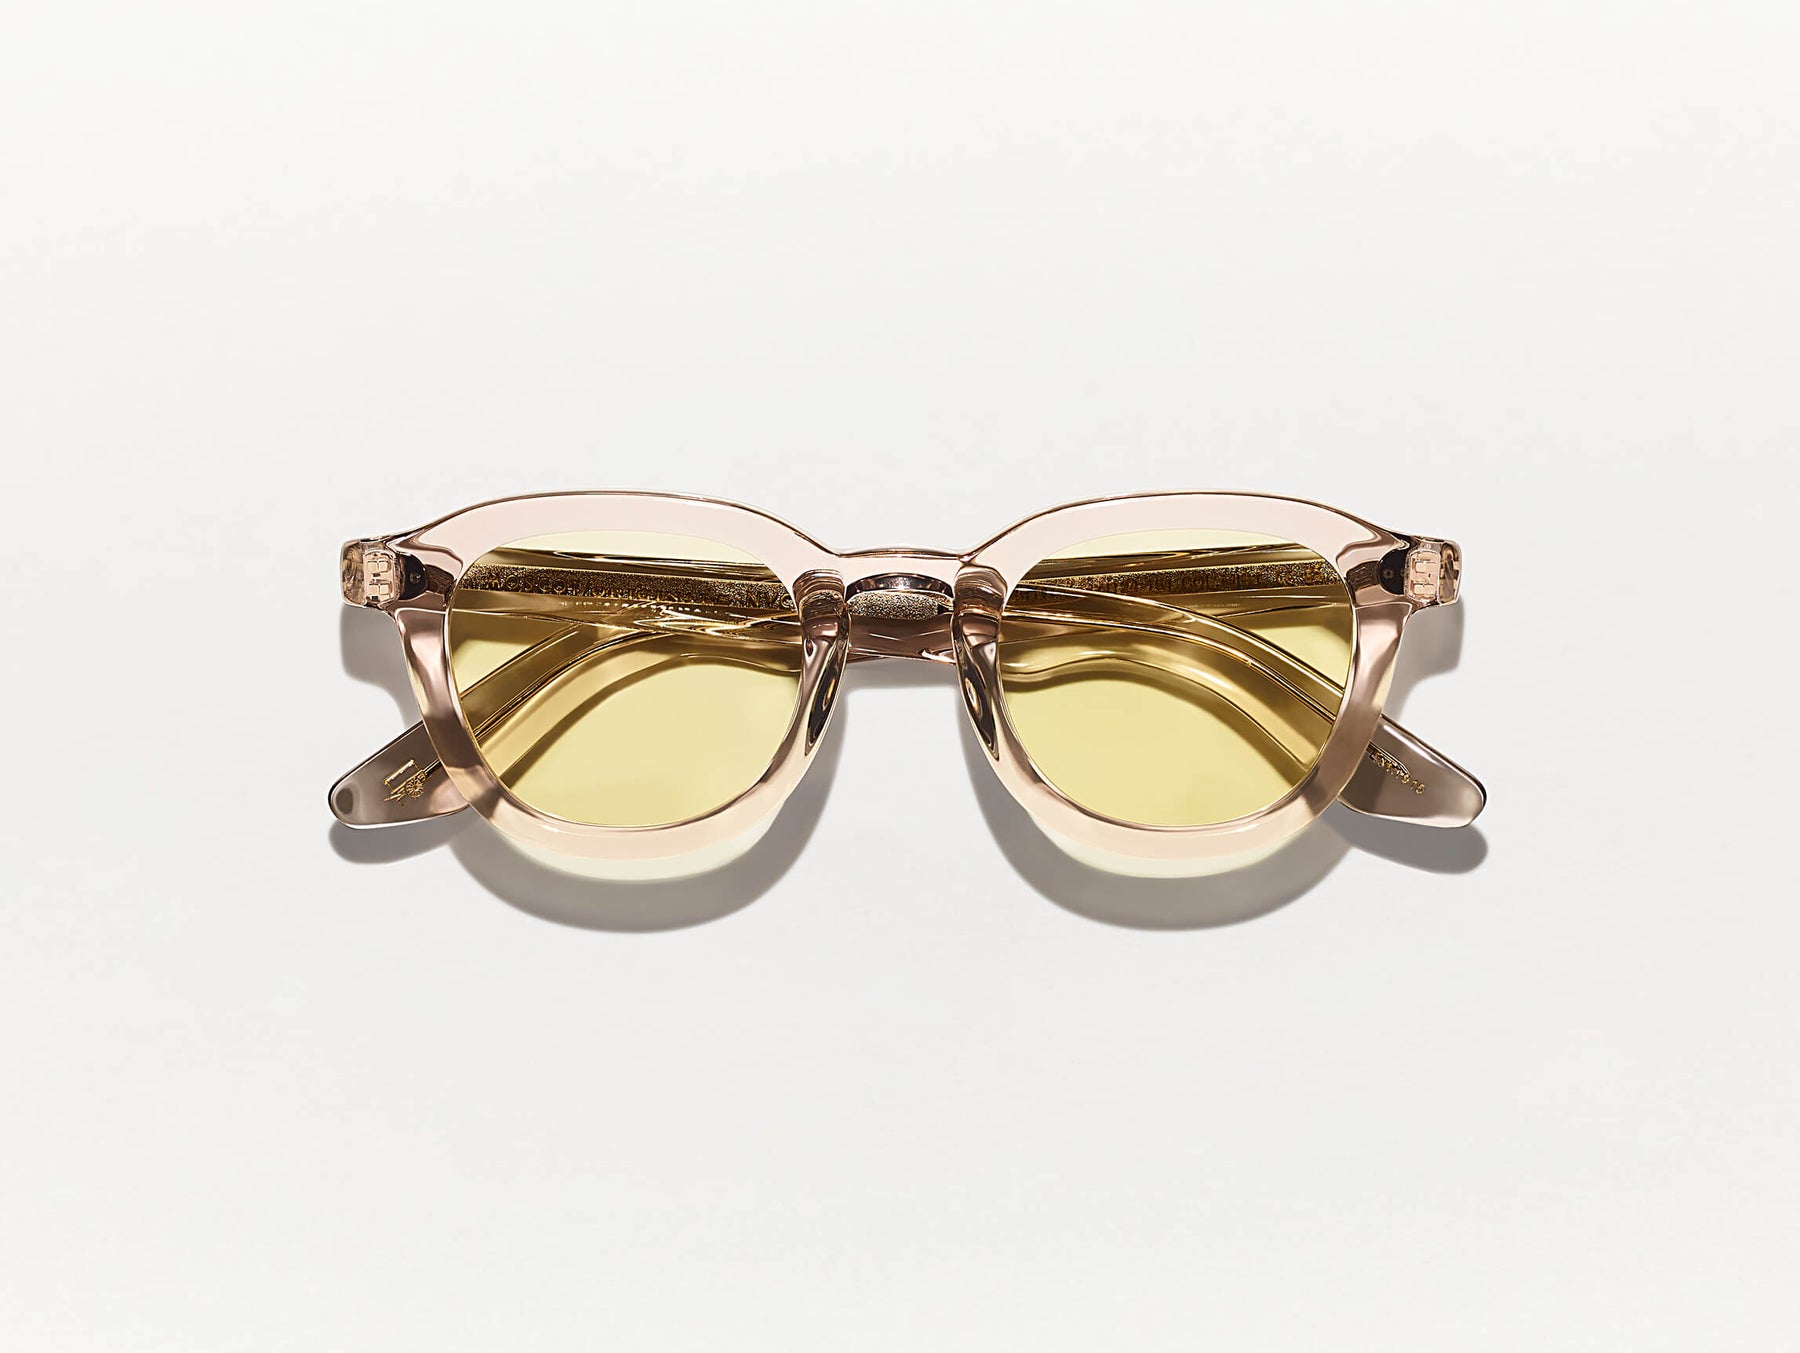 The DAHVEN Pastel with Pastel Yellow Tinted Lenses